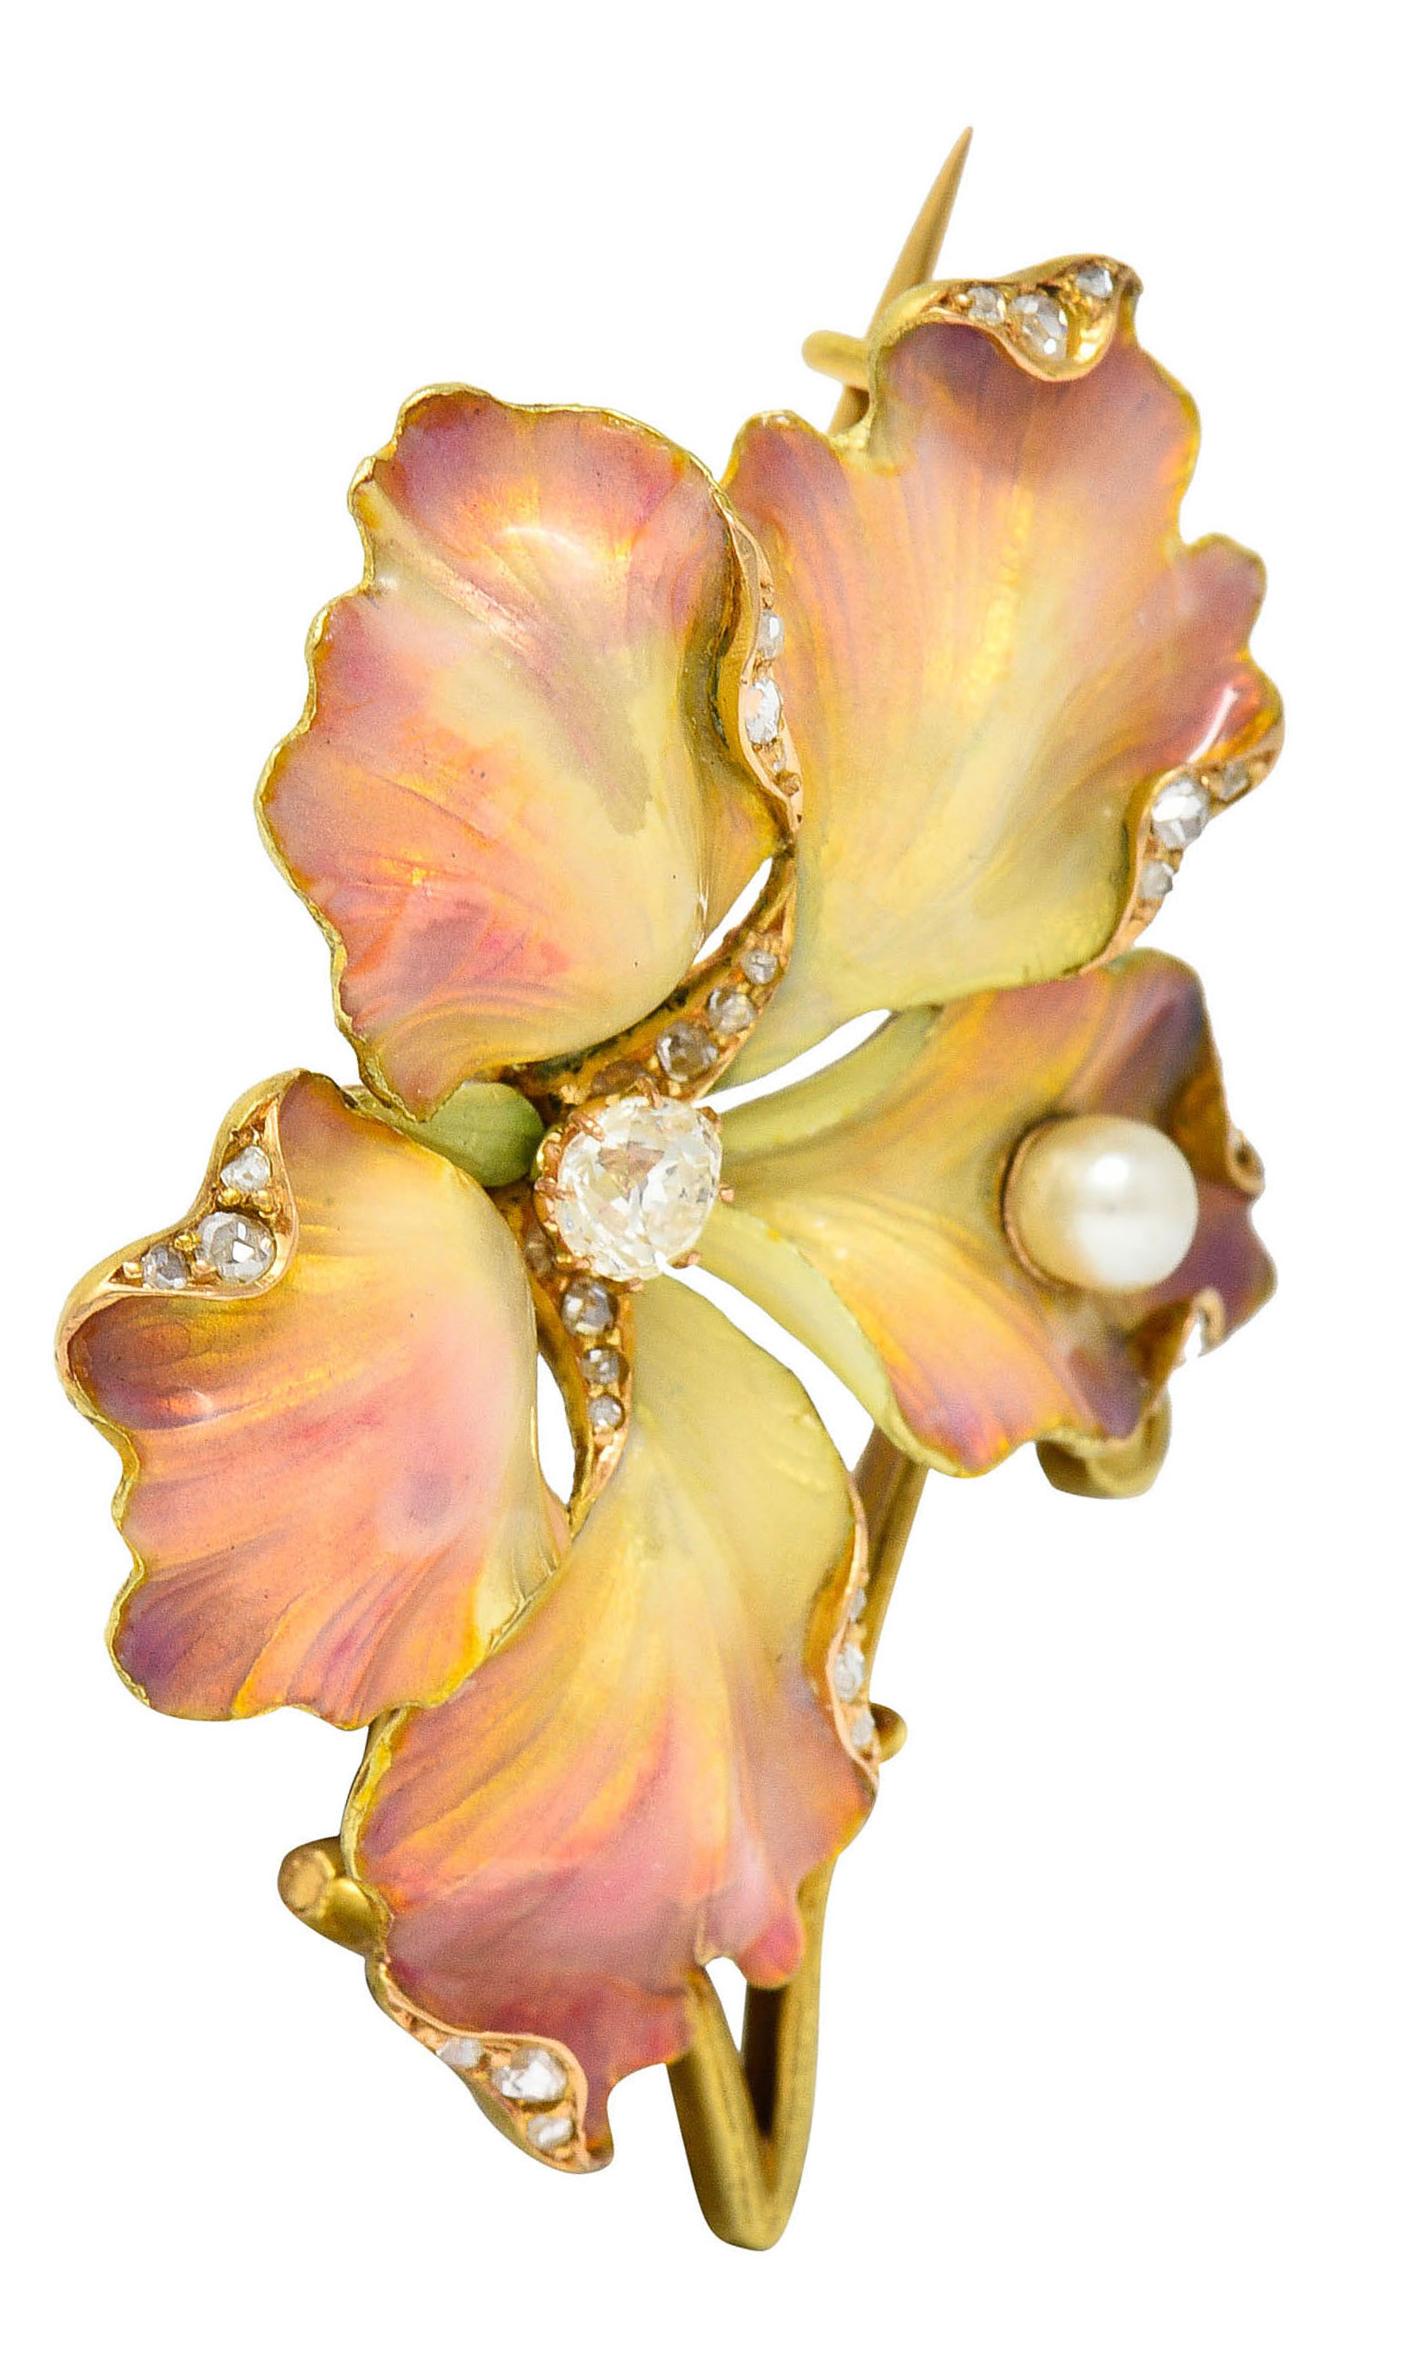 Designed as a highly rendered five petaled flower

Glossed with translucent cream to pink ombre enamel - exhibiting very minor loss

Centering an old European cut diamond weighing approximately 0.20 carat - G color with SI2 clarity

Accented by rose